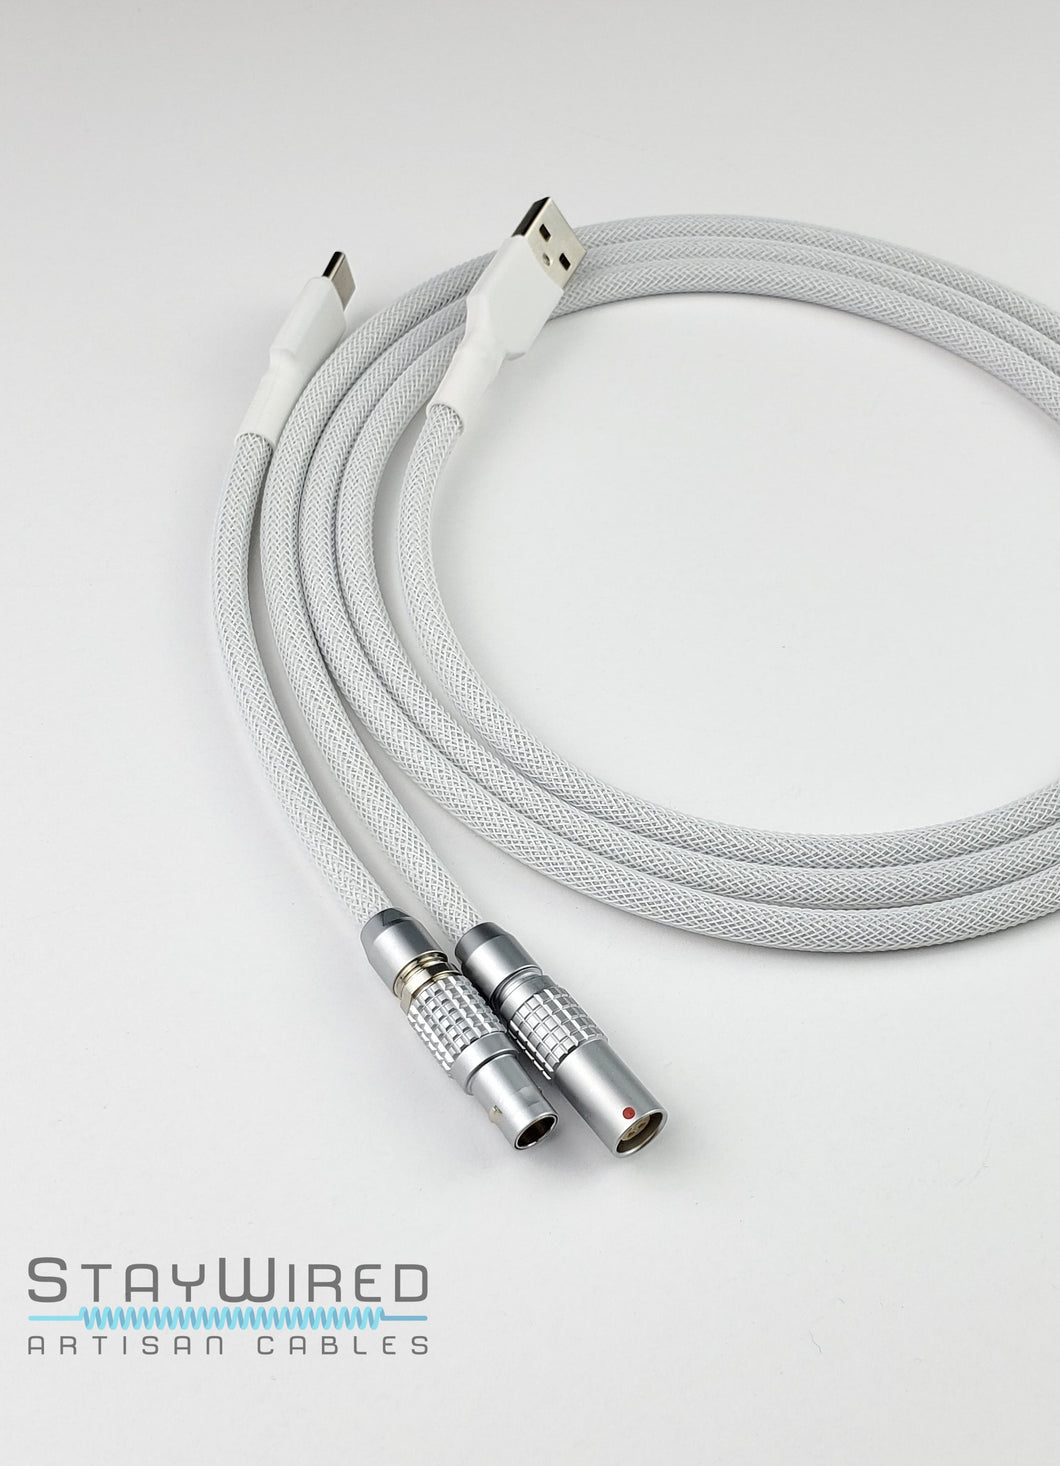 Sleek White // straight cable // Premium silver push/pull (Customize)